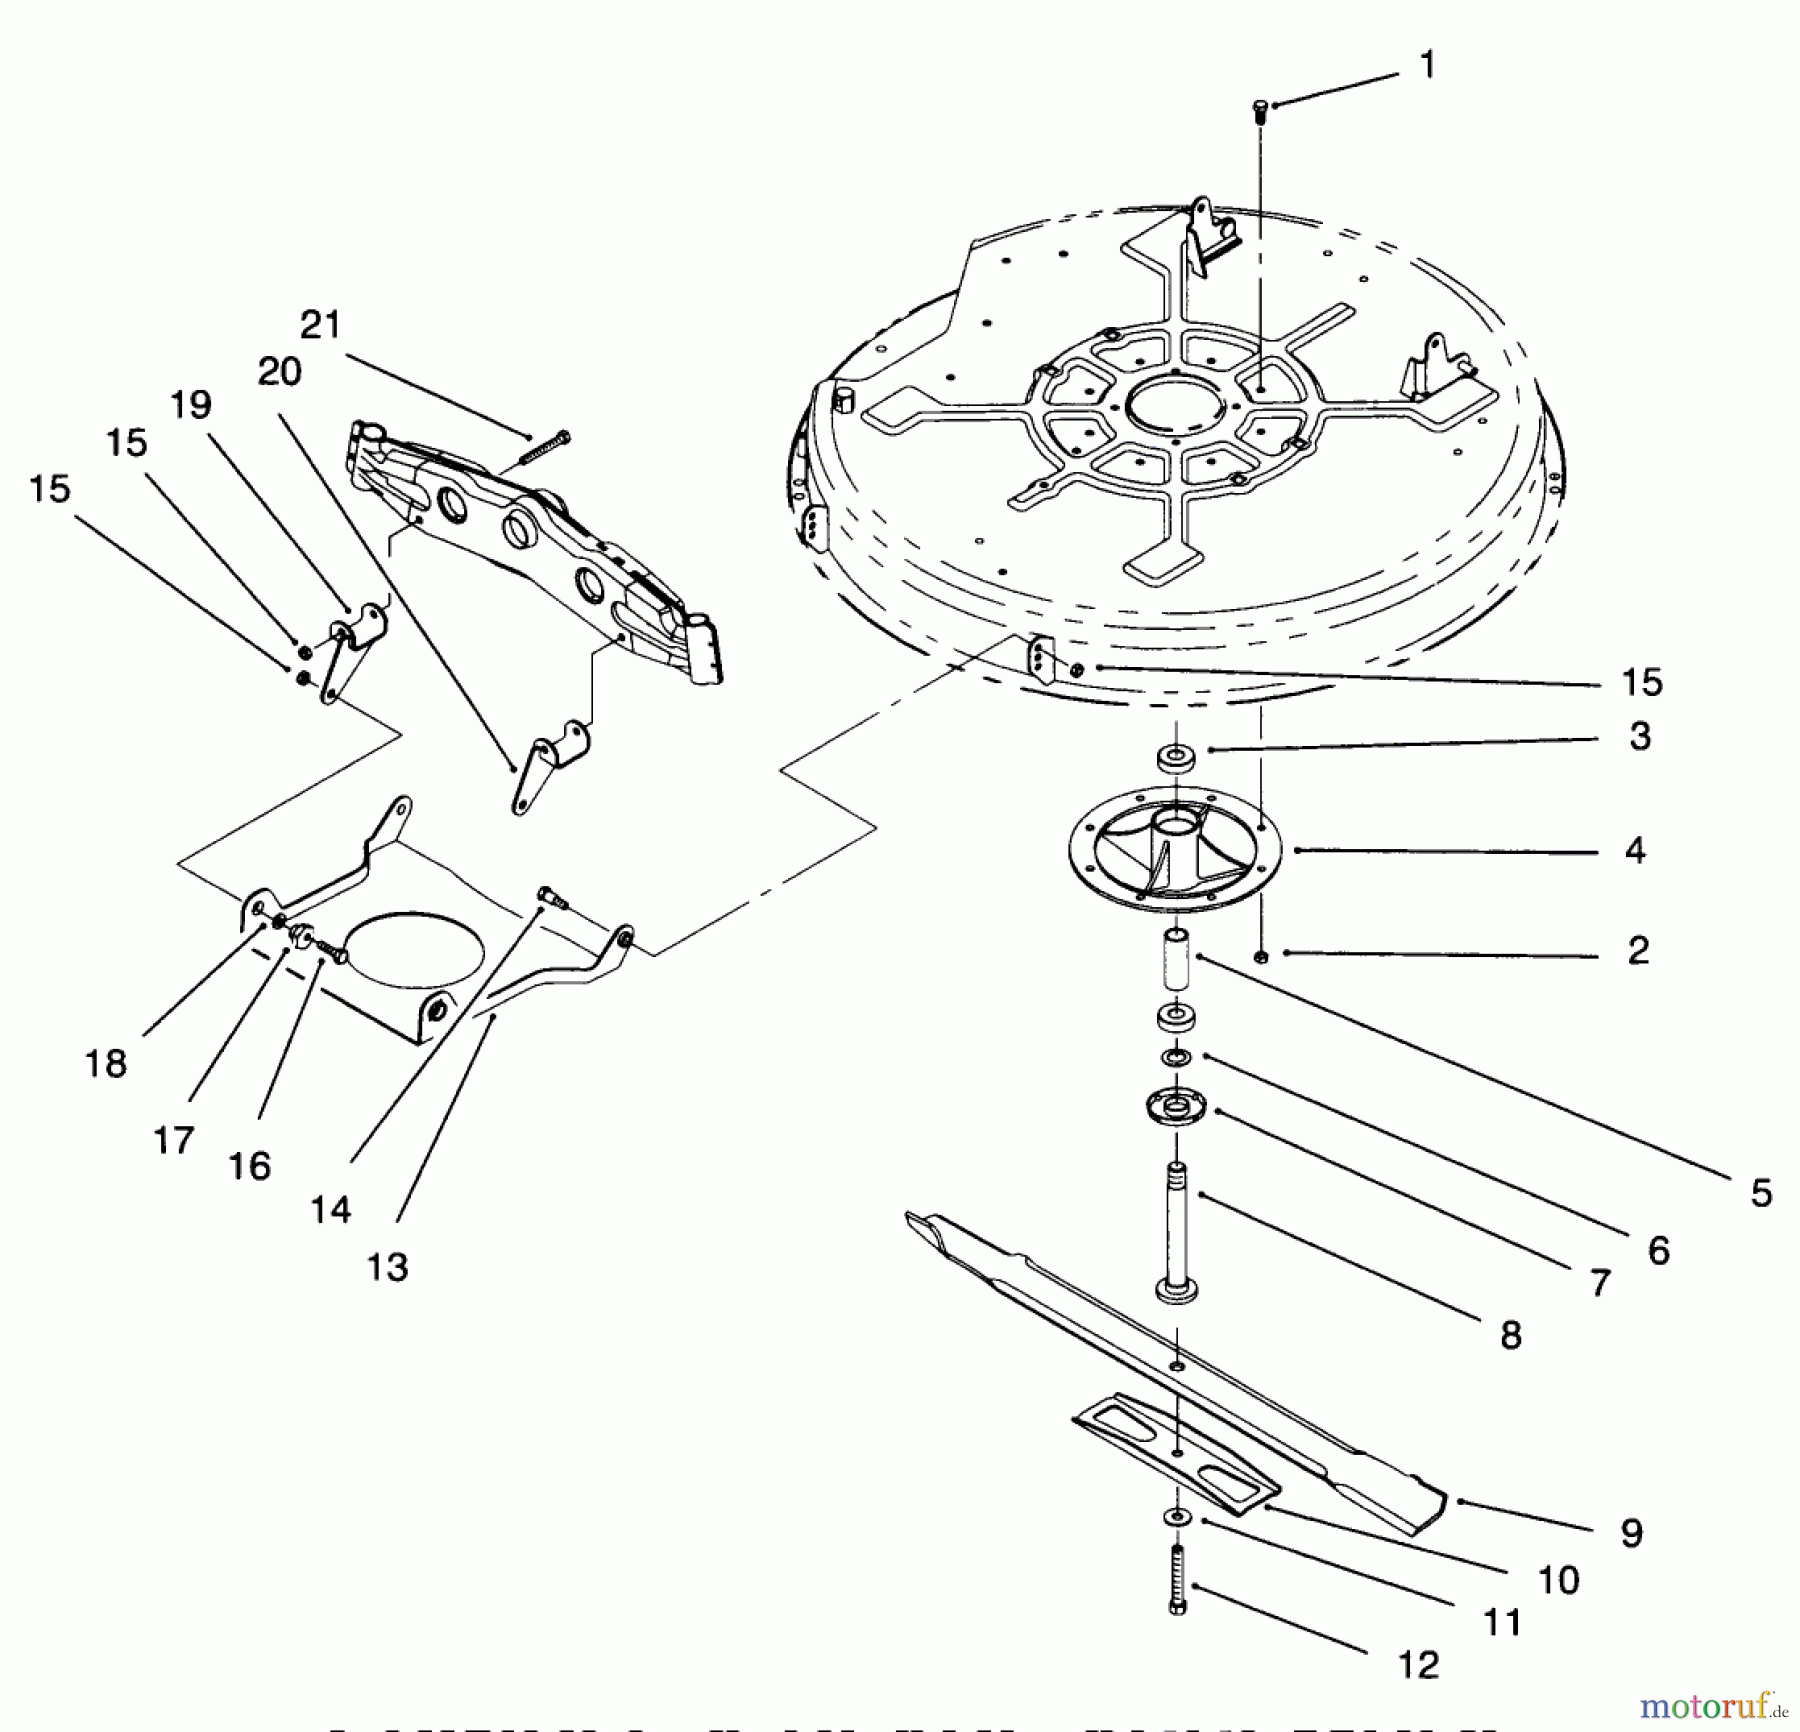  Toro Neu Mowers, Lawn & Garden Tractor Seite 1 71188 (12-32XL) - Toro 12-32XL Lawn Tractor, 1996 (6900001-6999999) SPINDLE & BLADE ASSEMBLY